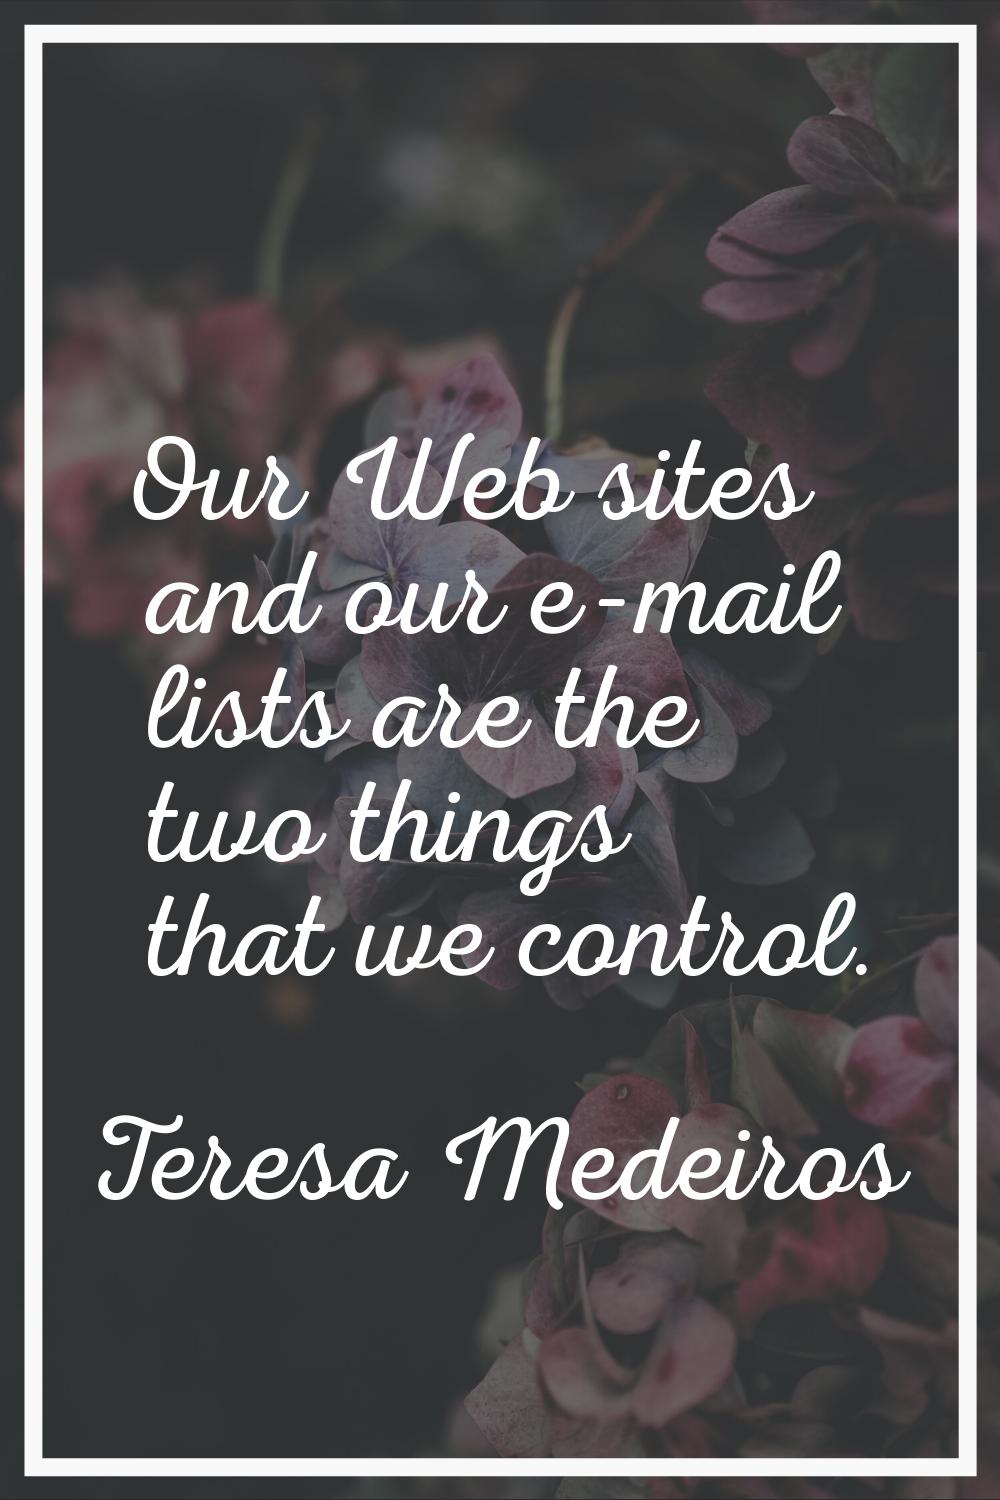 Our Web sites and our e-mail lists are the two things that we control.